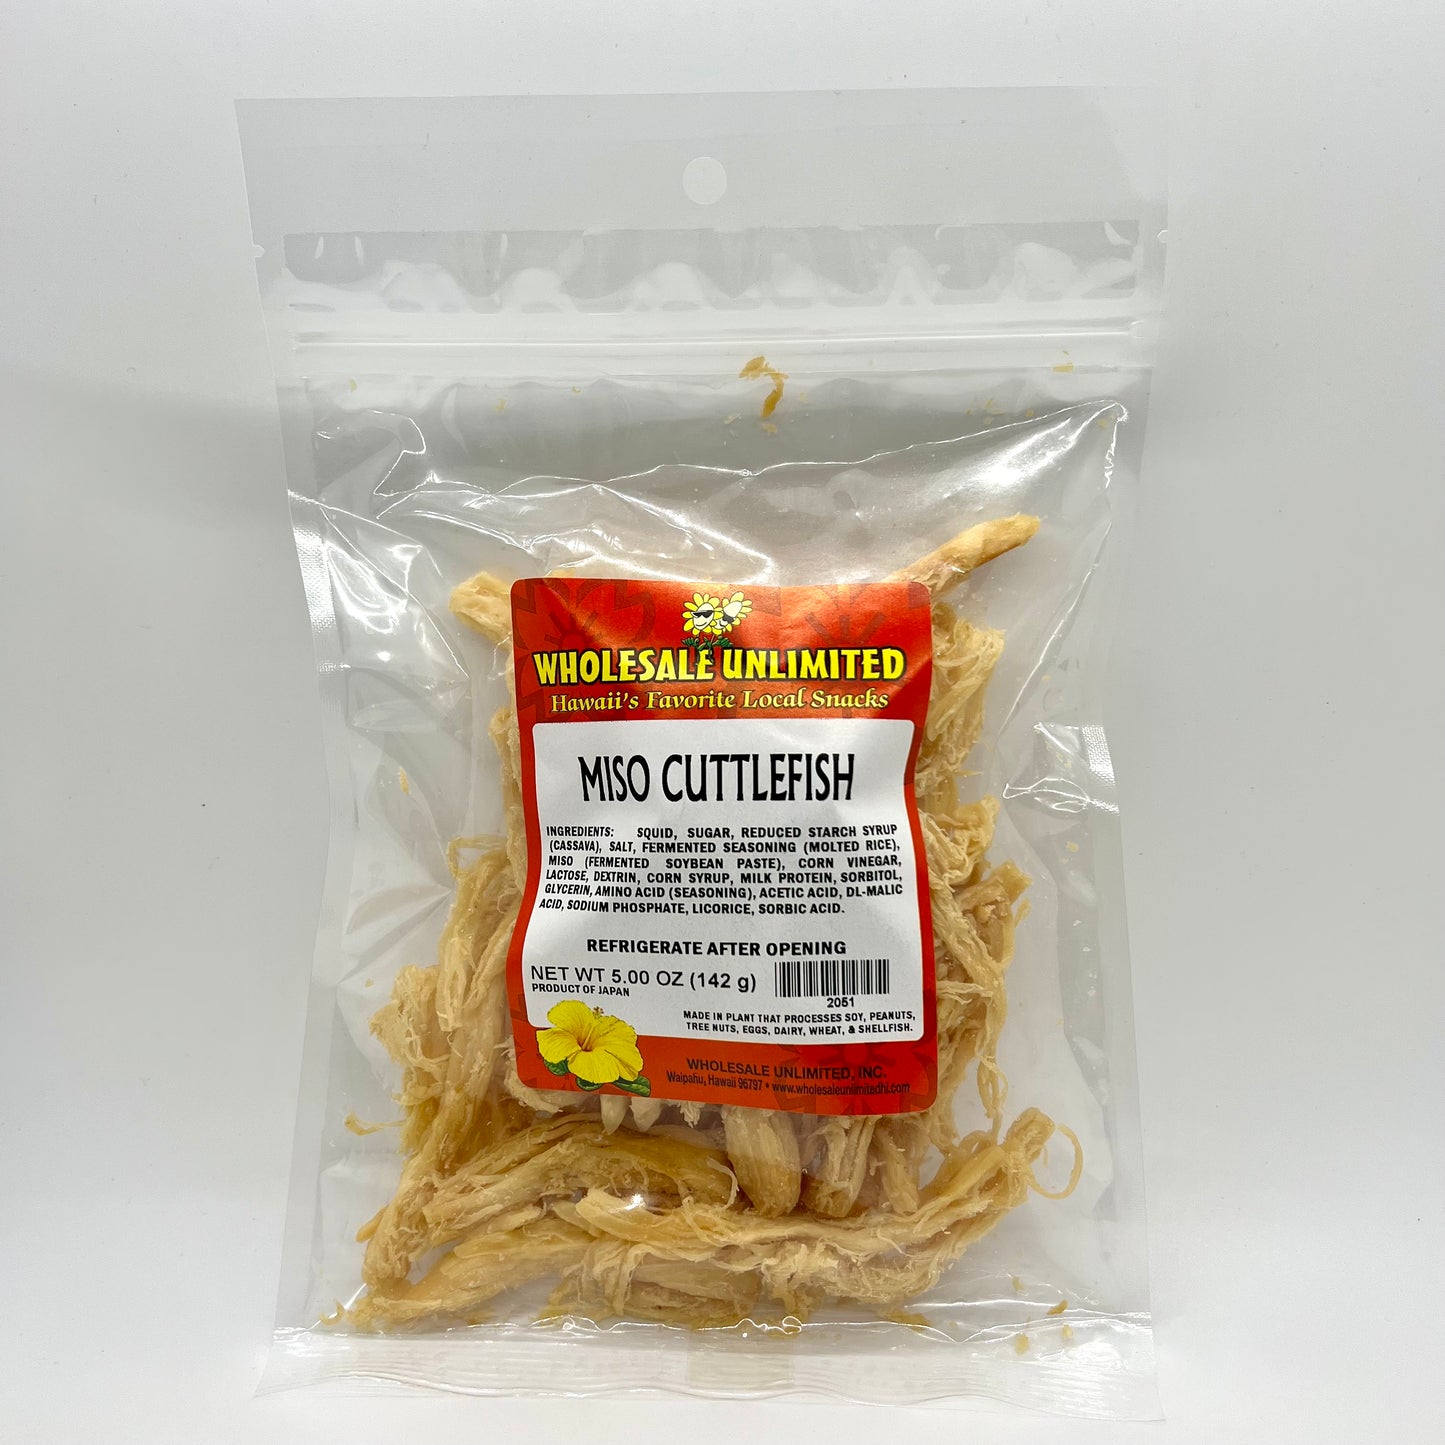 (NEW) Miso Cuttlefish - Wholesale Unlimited Inc.